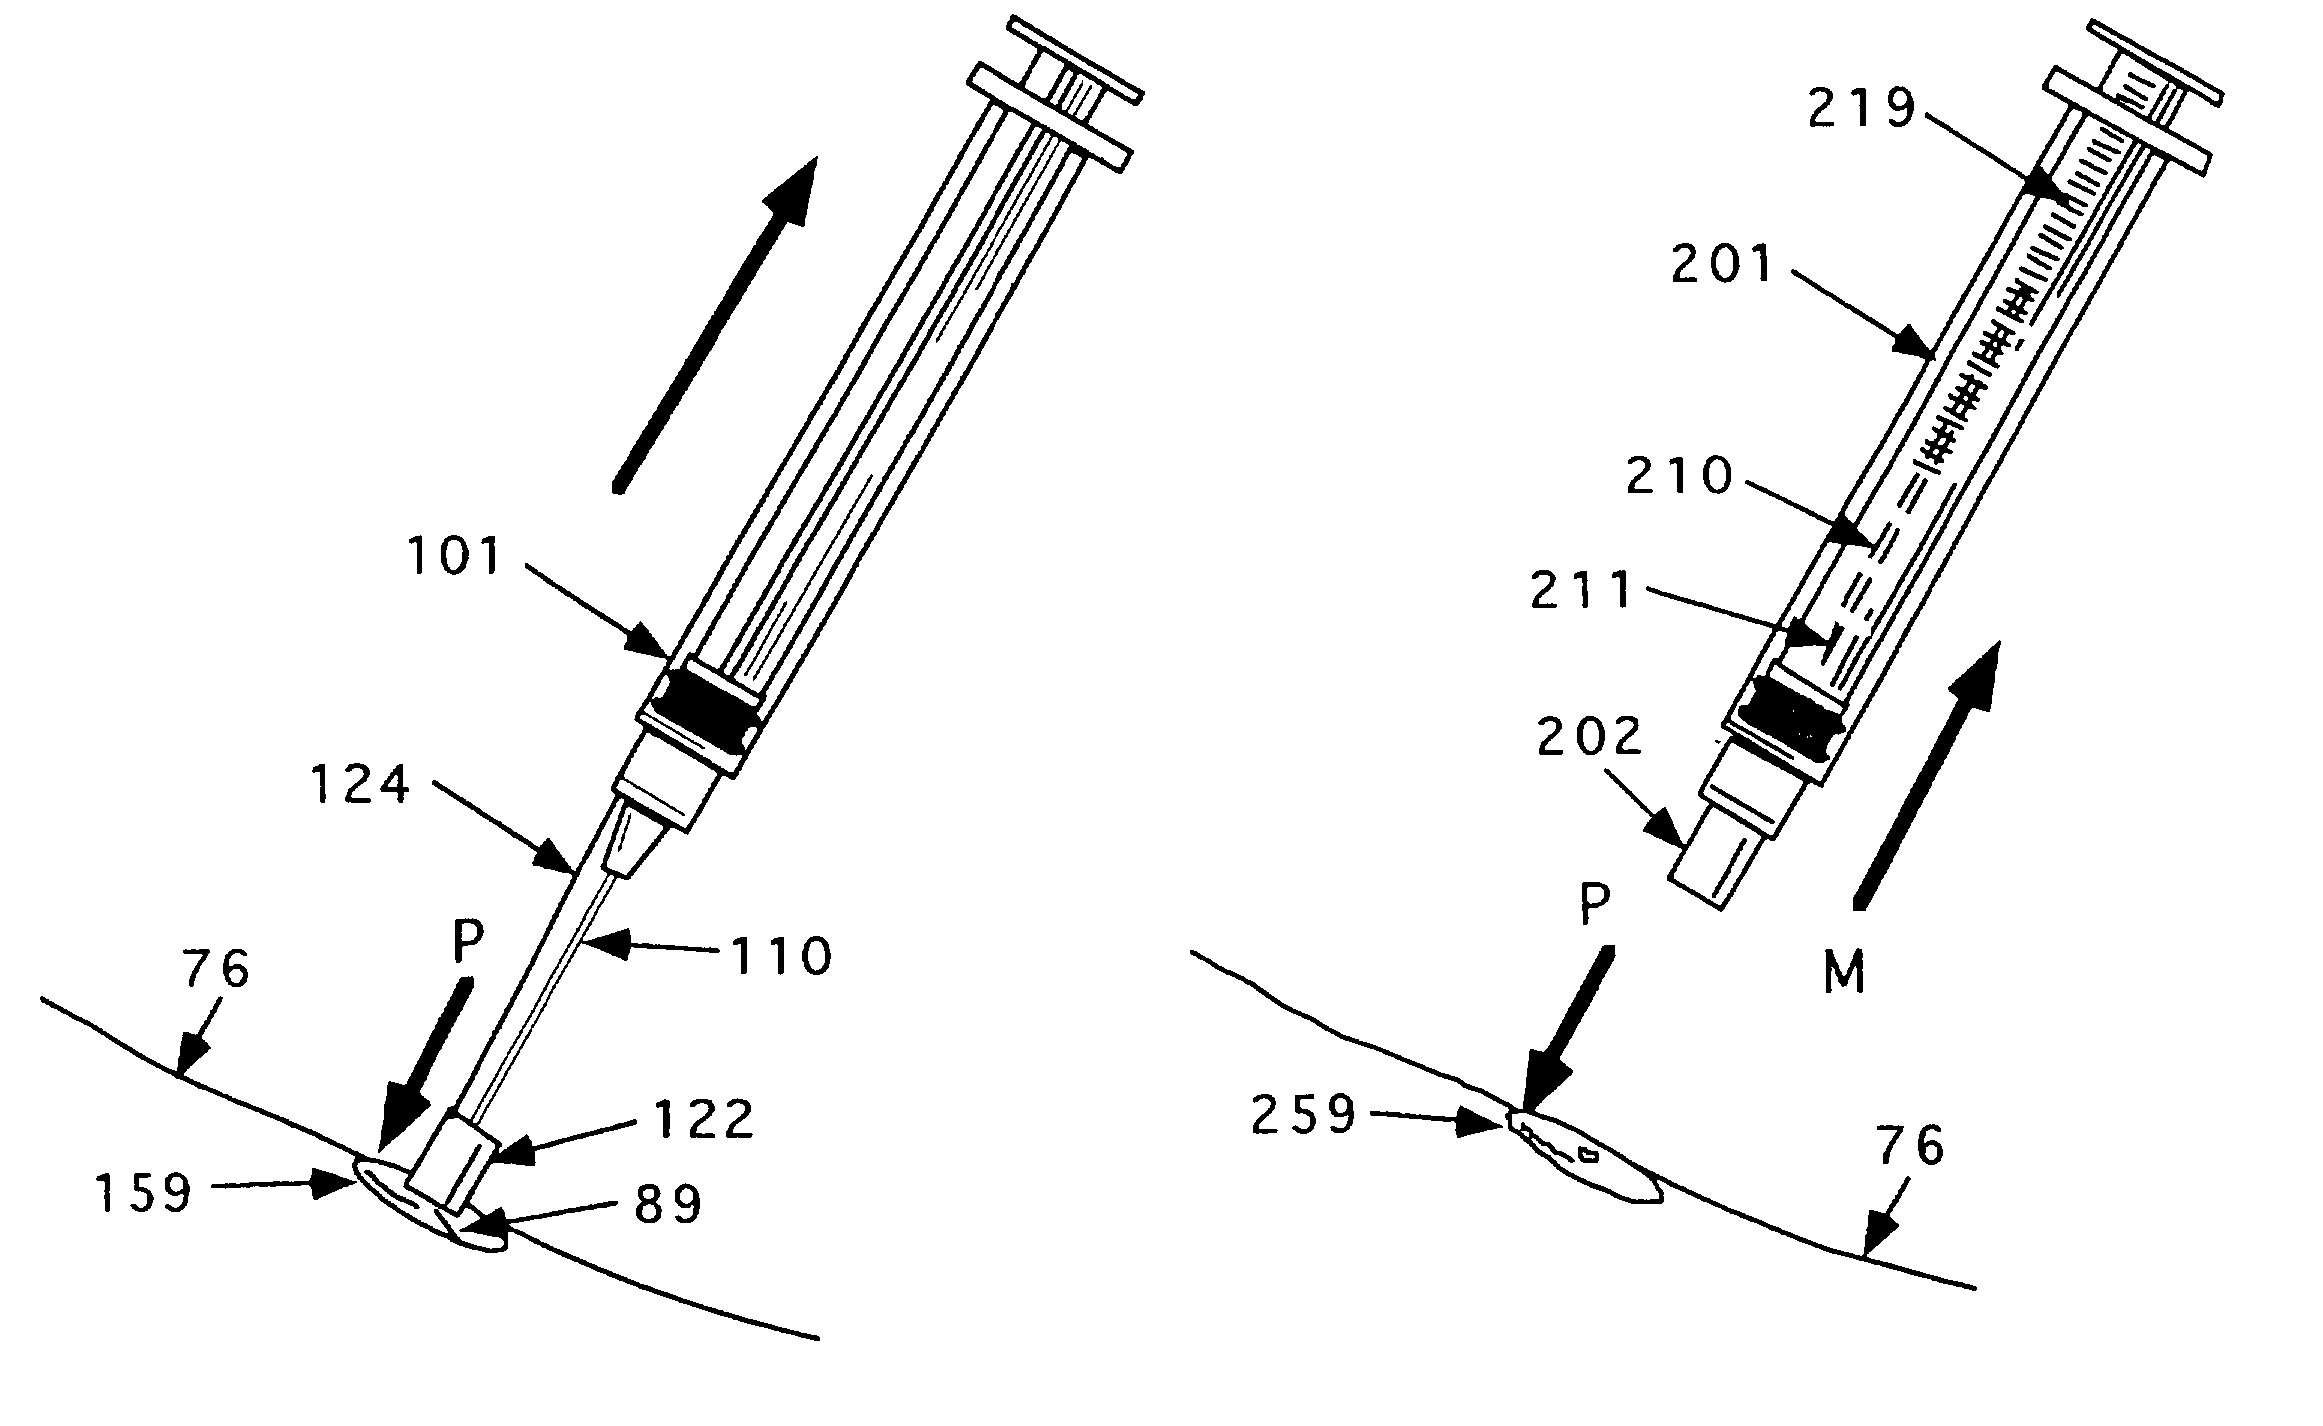 Method and apparatus for indicating or covering a percutaneous puncture site